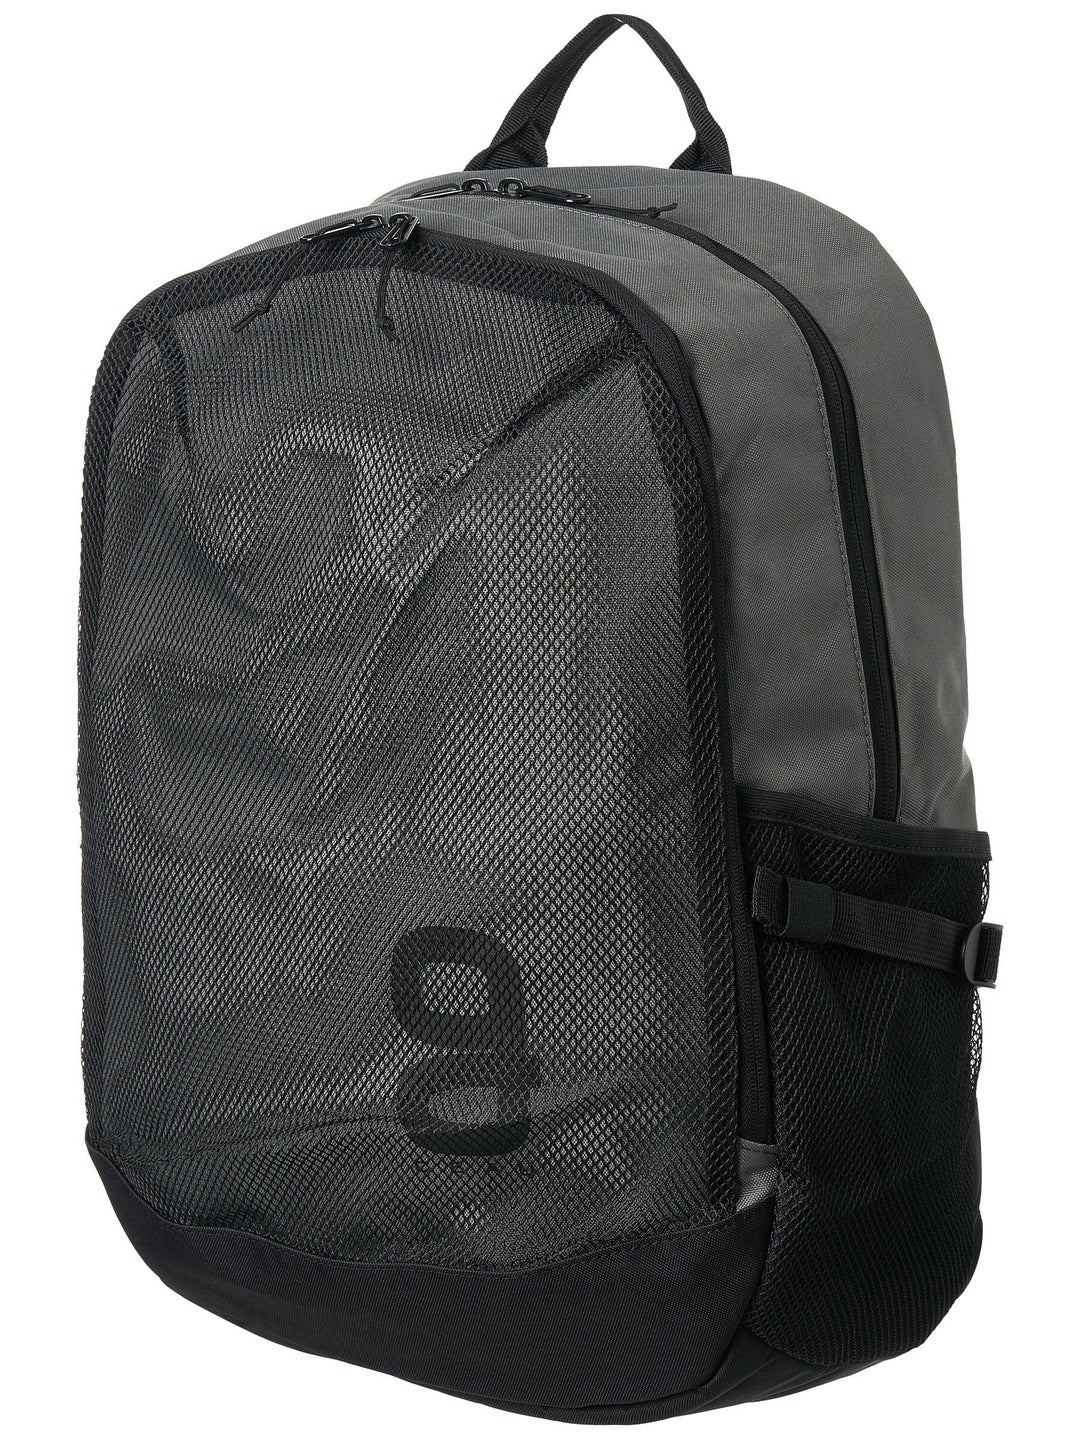 Geau Sport Aether Backpack Bag Charcoal | Tennis Warehouse